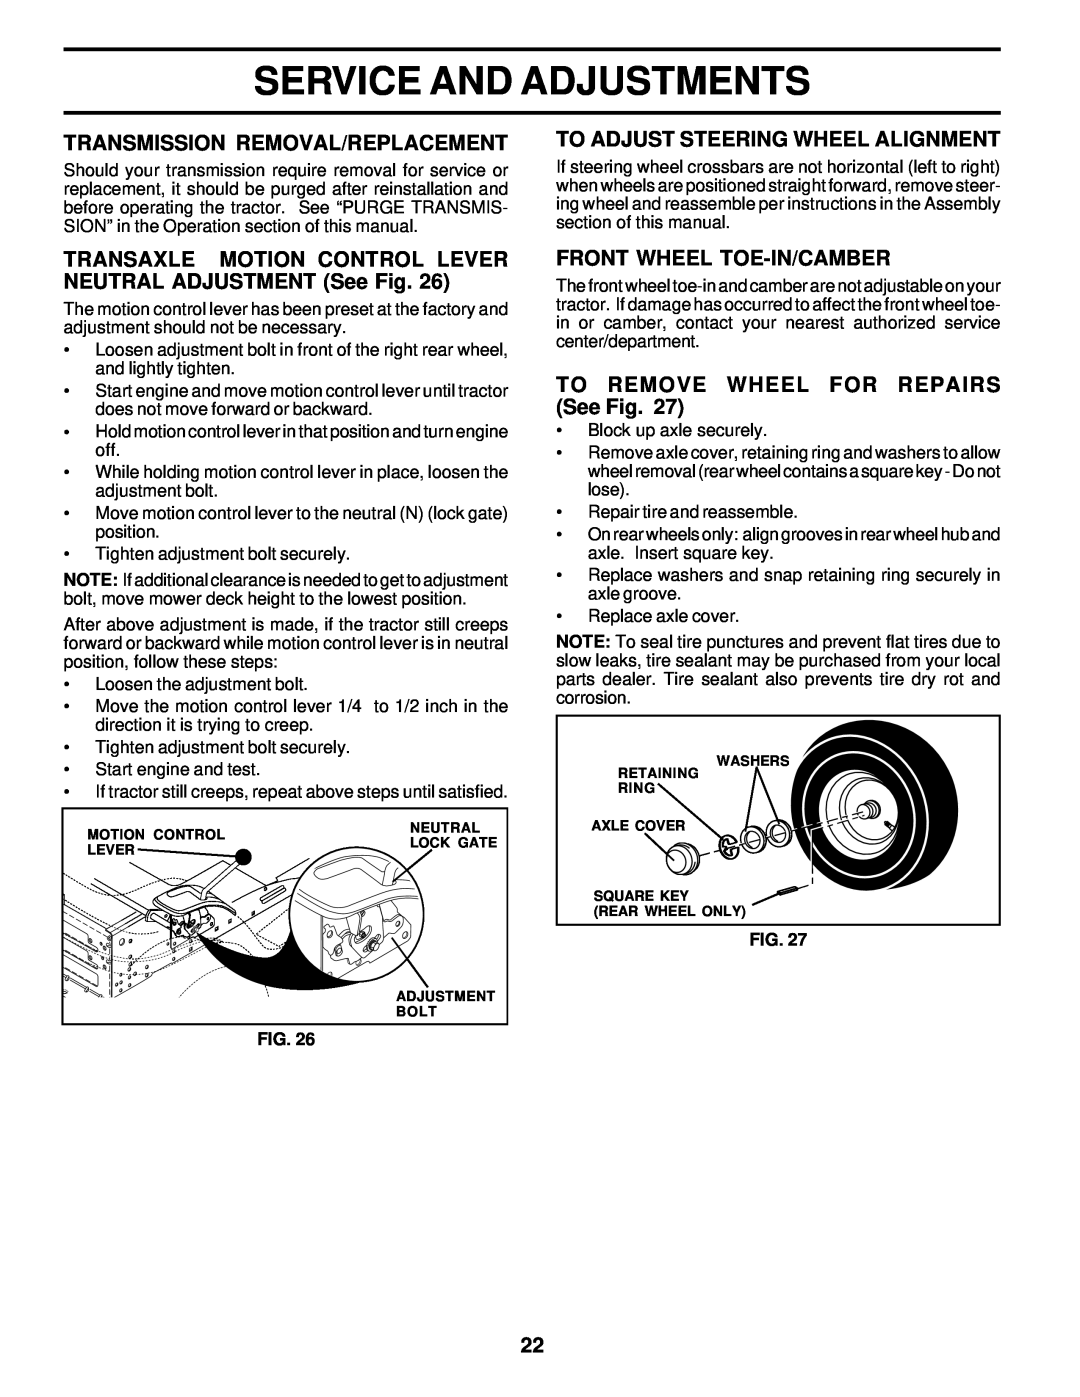 Poulan 177552 owner manual Transmission Removal/Replacement, To Adjust Steering Wheel Alignment, Front Wheel Toe-In/Camber 